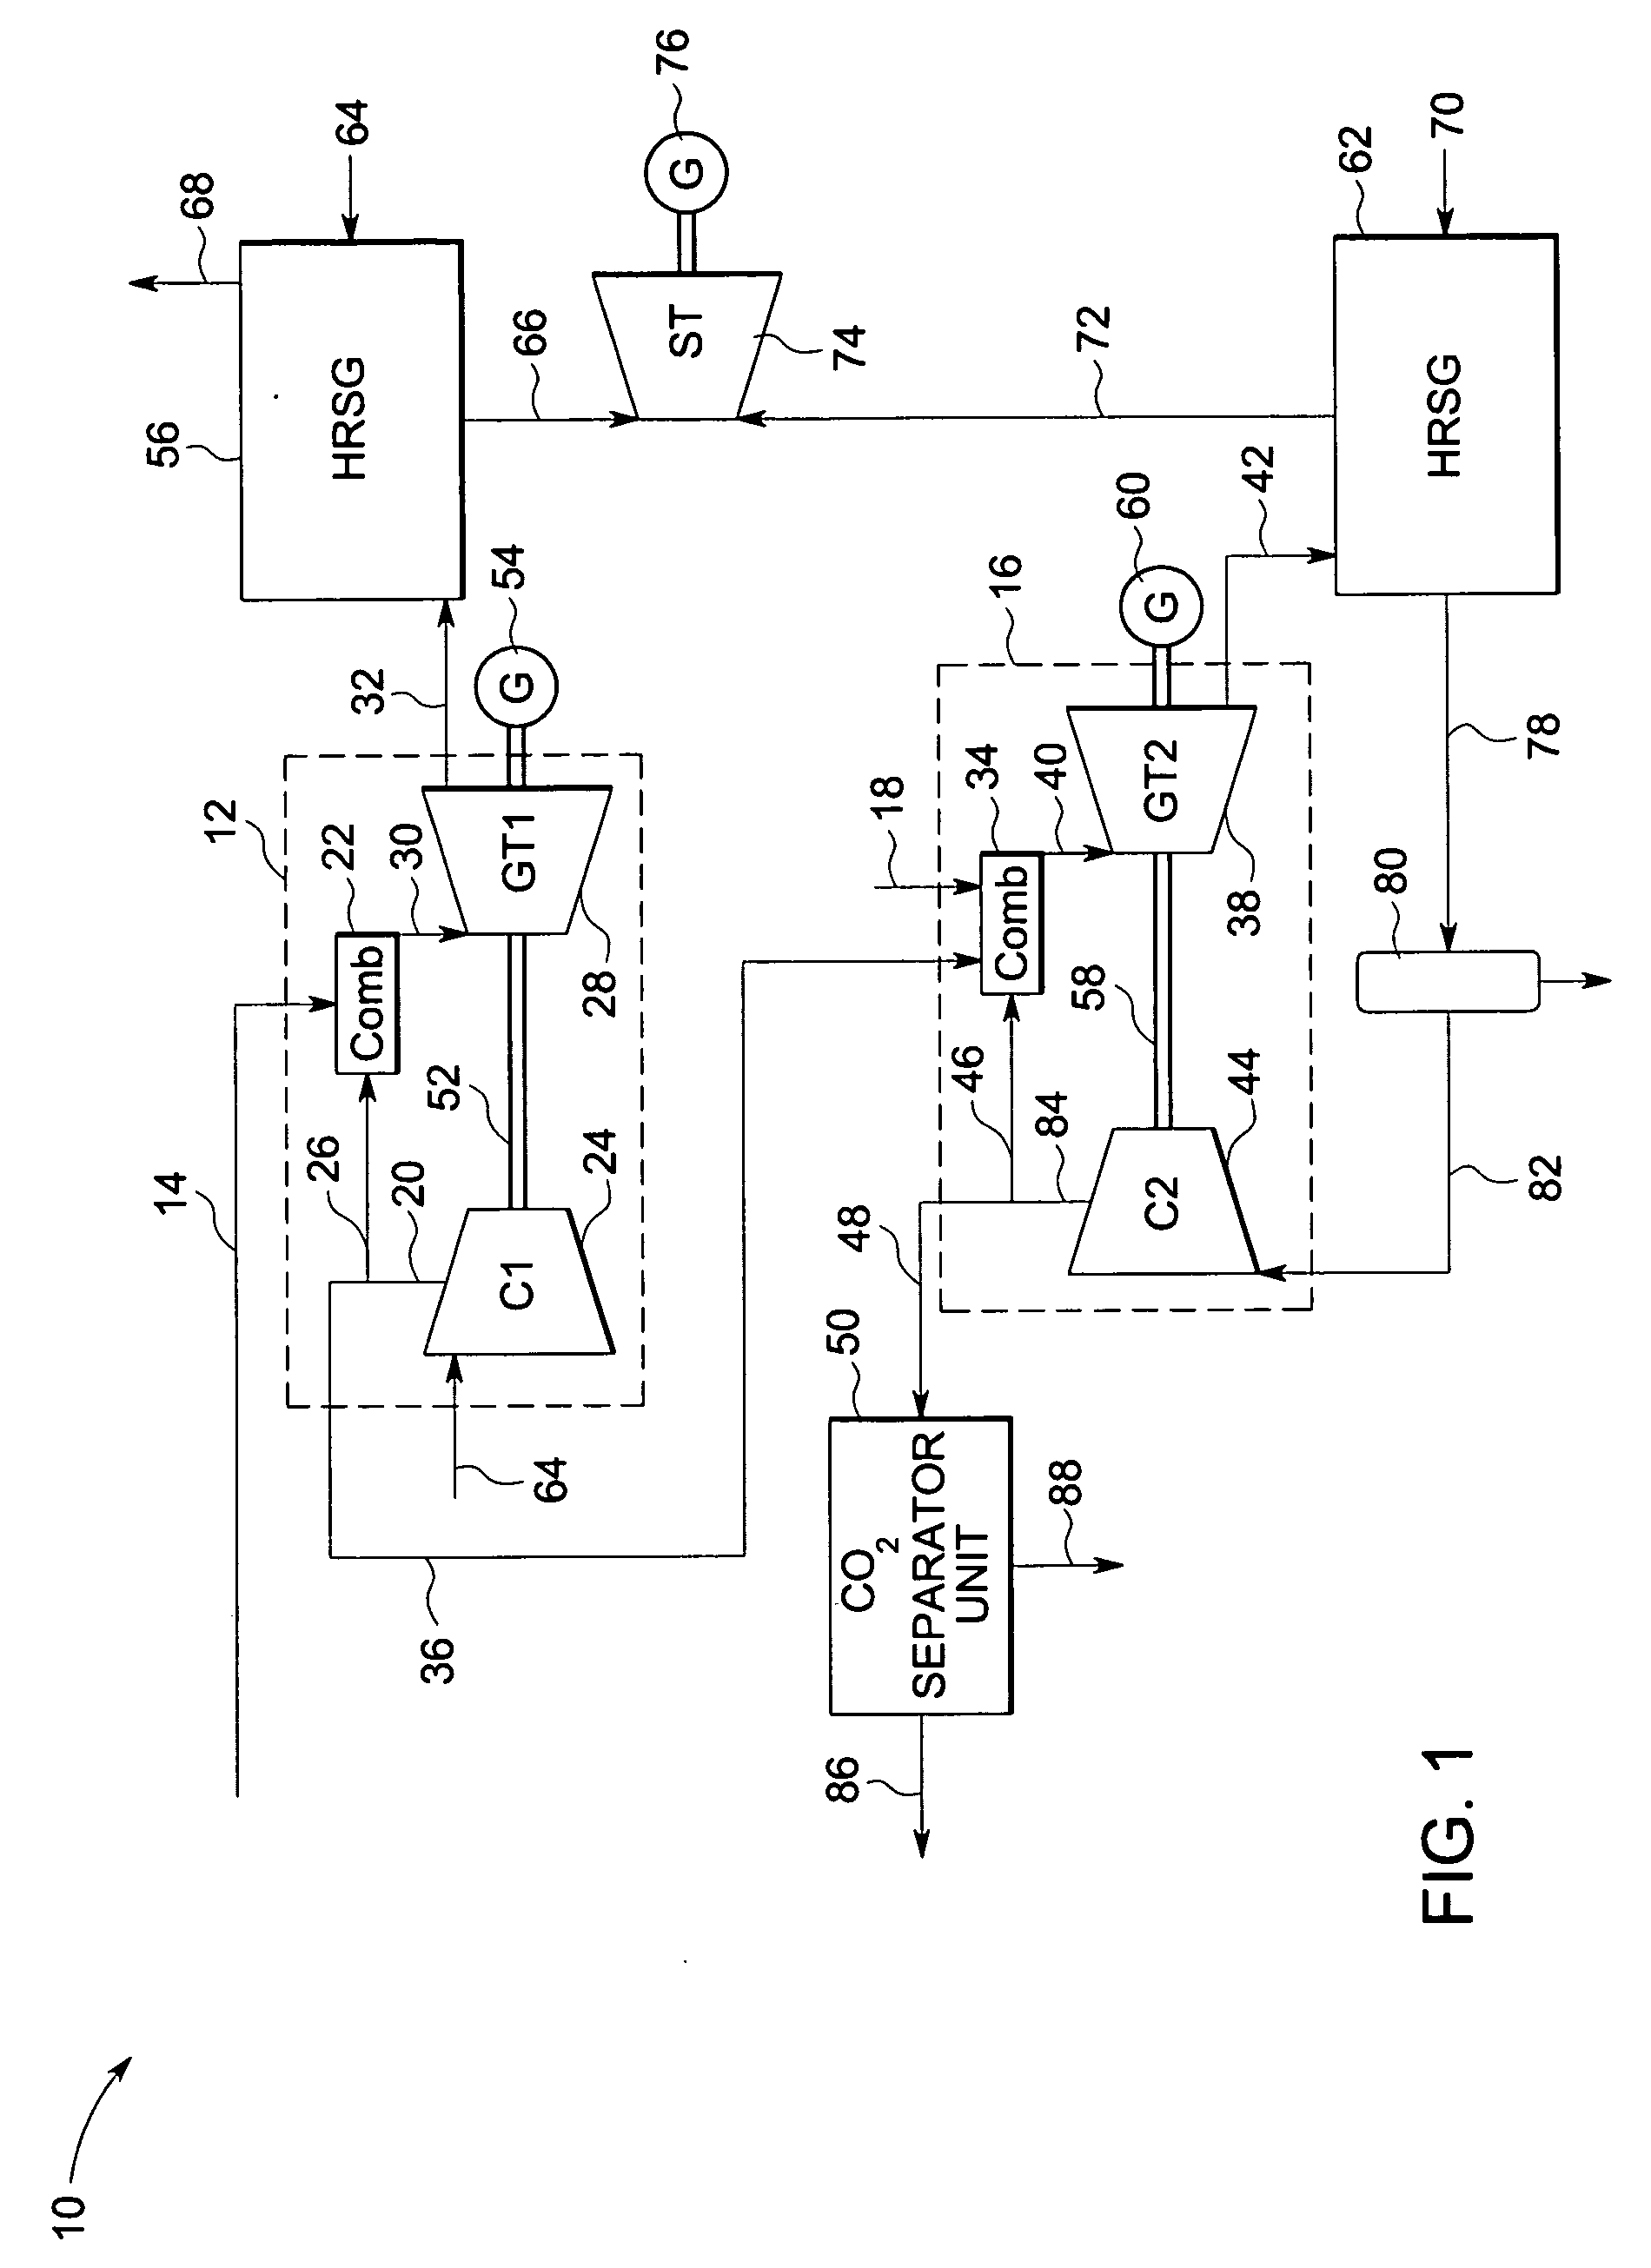 Systems and methods for power generation with carbon dioxide isolation